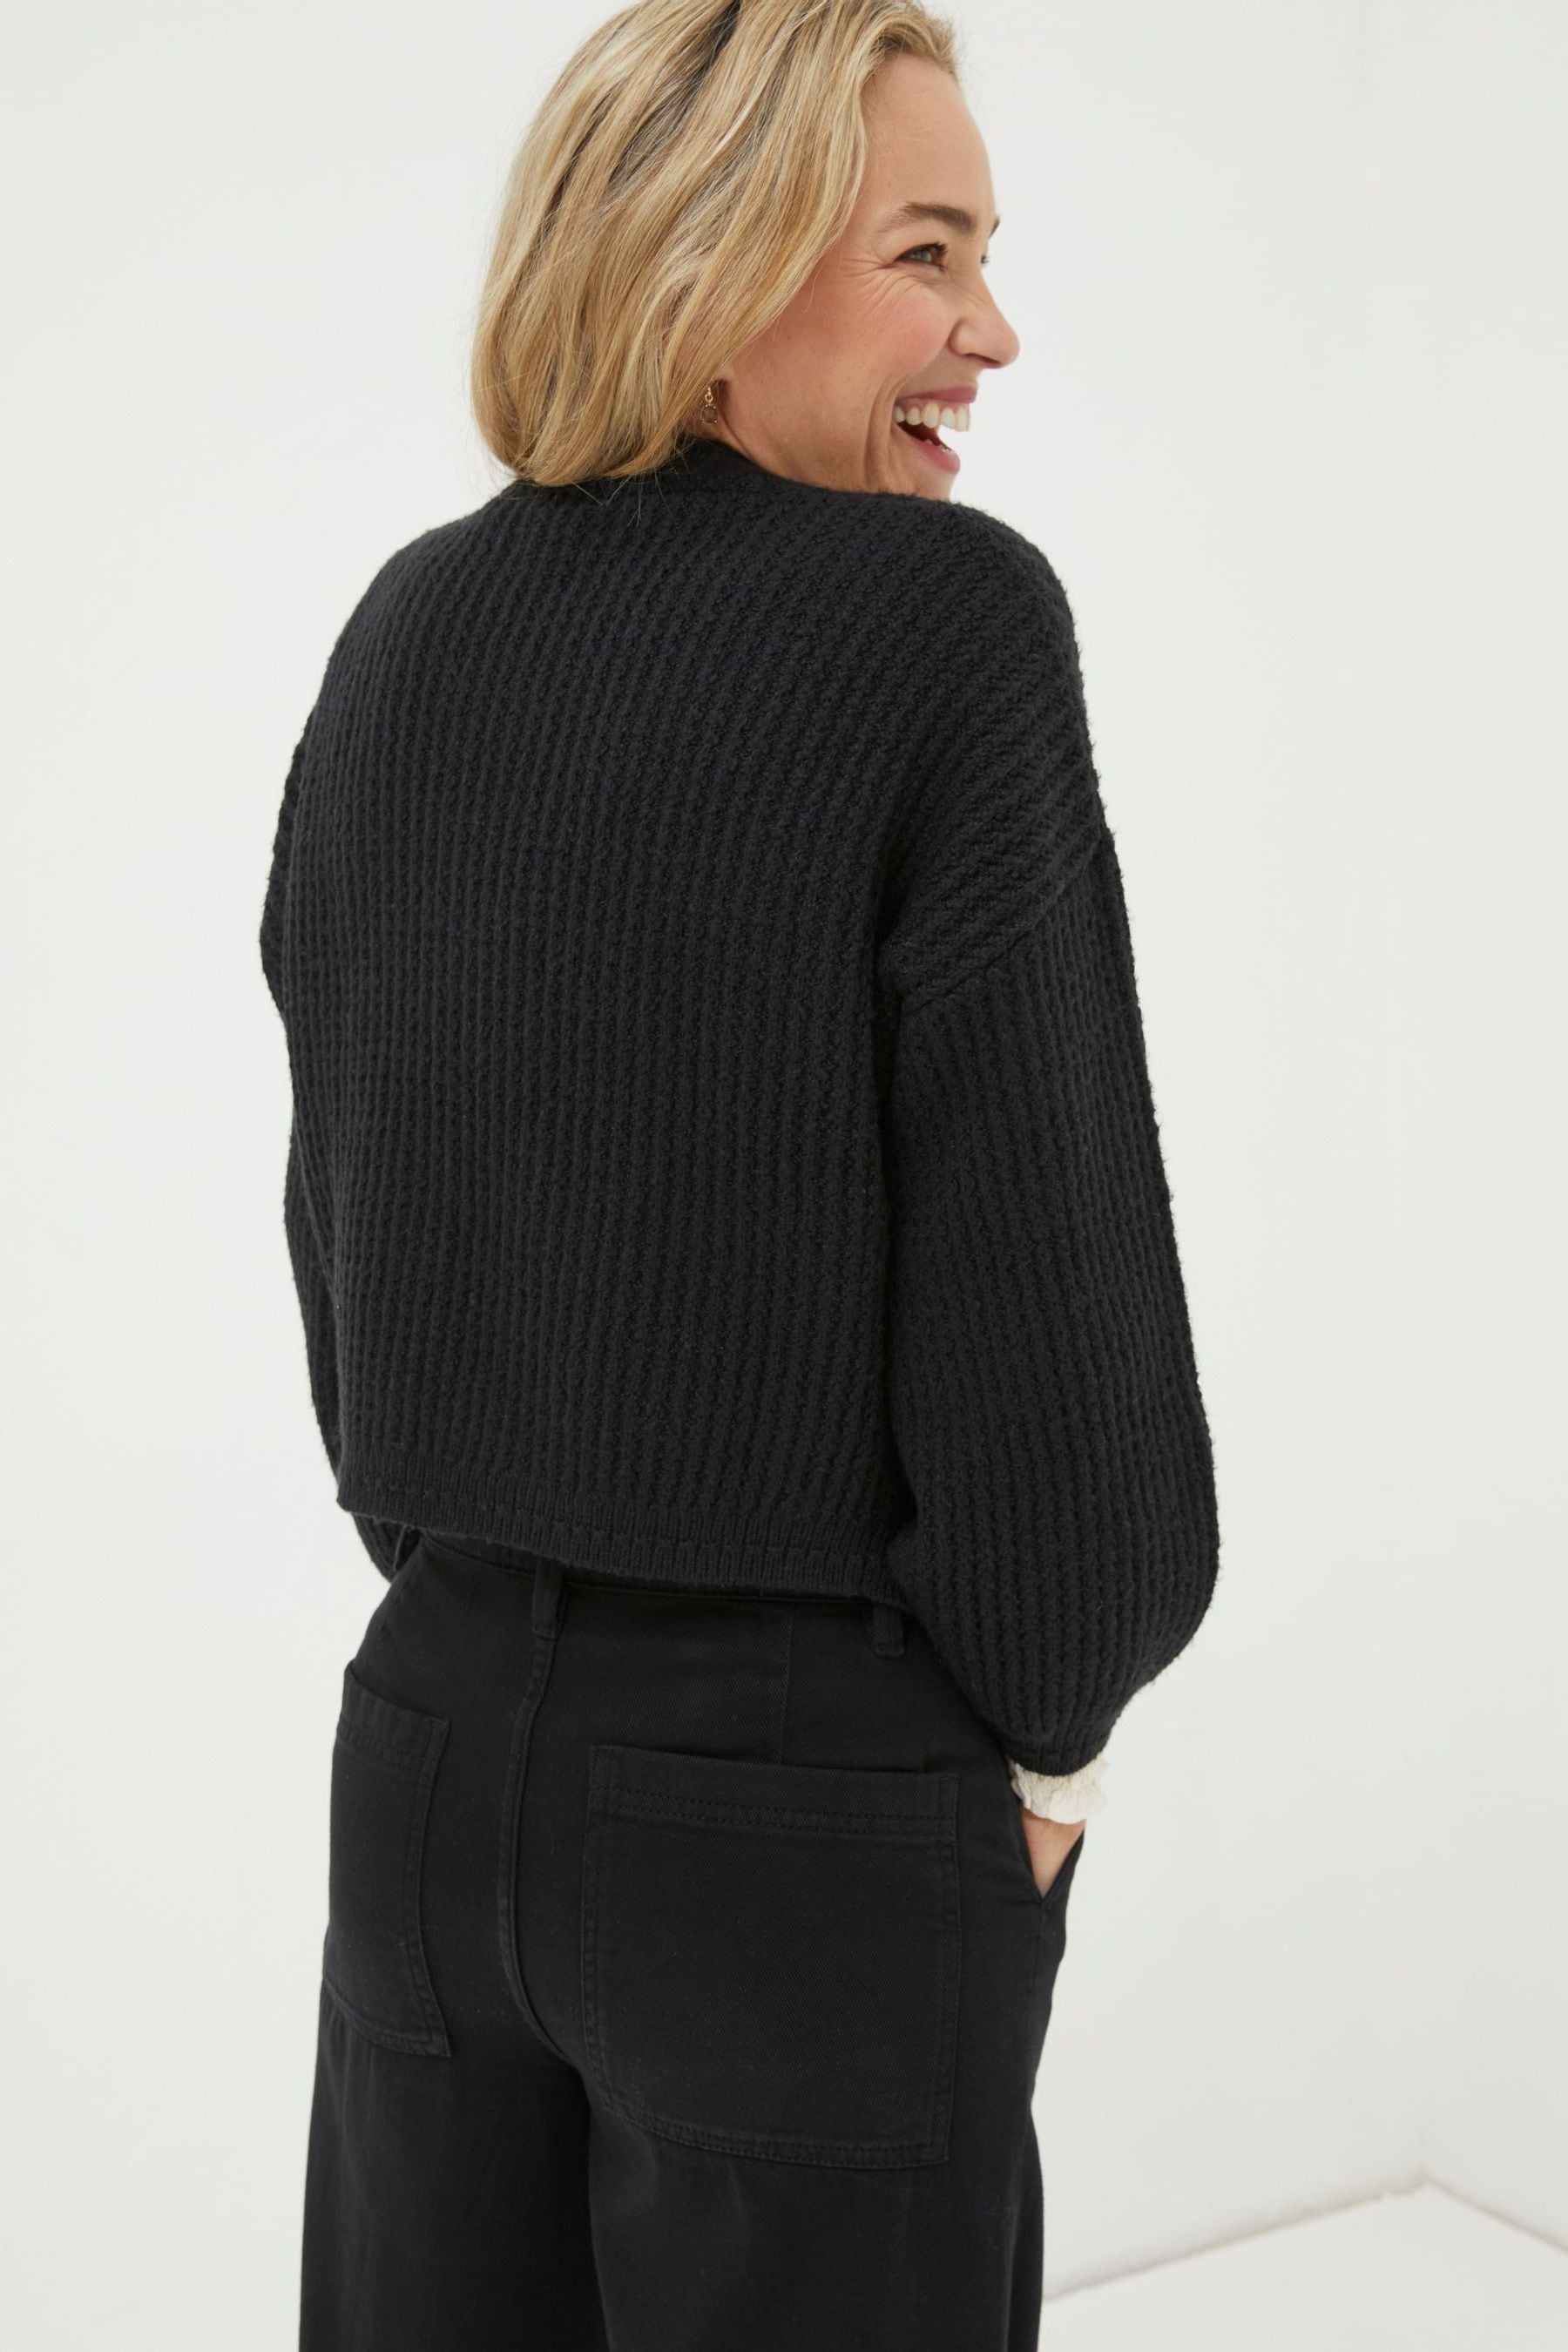 Buy FatFace Black Anna Cardigan from the Next UK online shop